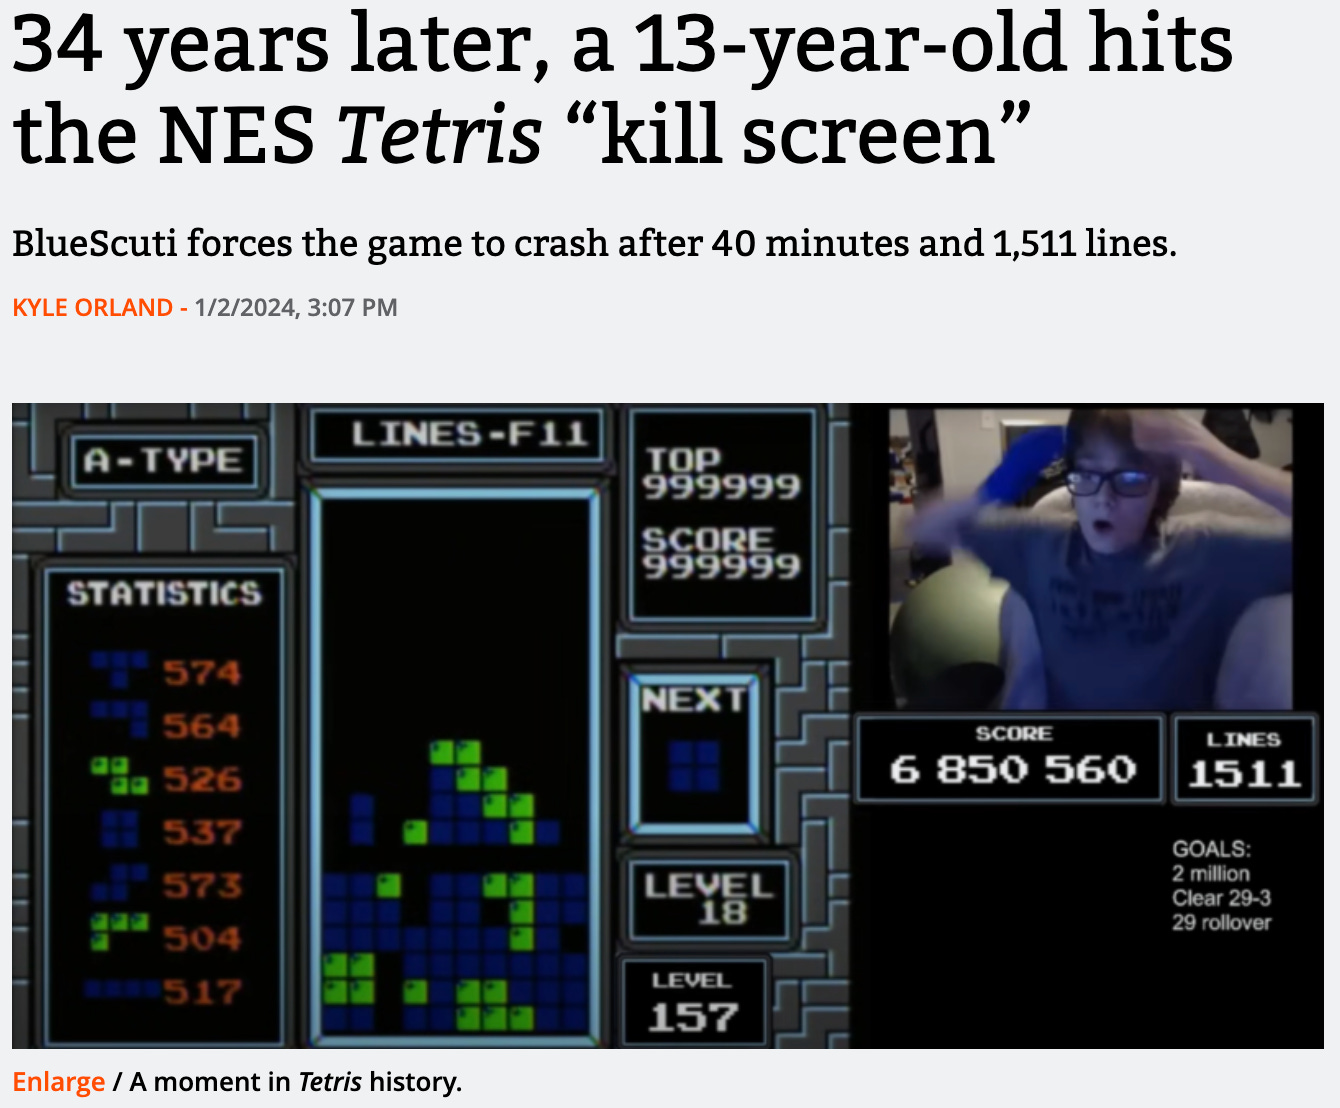  SUBSCRIBE SIGN IN FROM RUSSIA WITH FUN — 34 years later, a 13-year-old hits the NES Tetris “kill screen” BlueScuti forces the game to crash after 40 minutes and 1,511 lines. KYLE ORLAND - 1/2/2024, 3:07 PM  A moment in <em>Tetris</em> history. Enlarge / A moment in Tetris history. 90